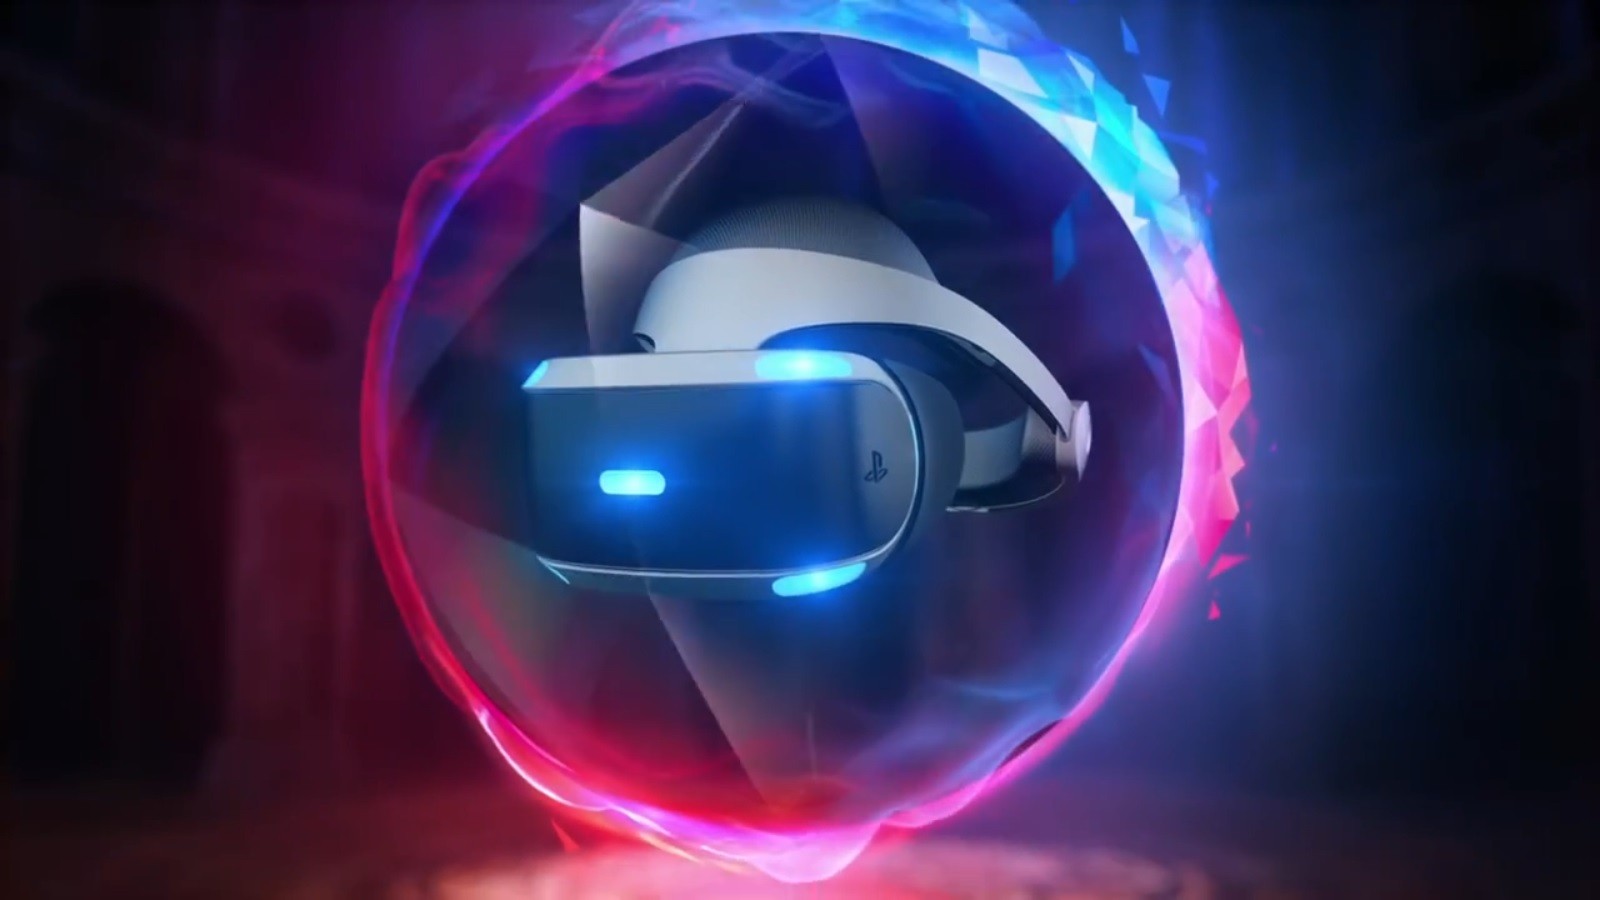 The 11 best games on PlayStation VR, Games